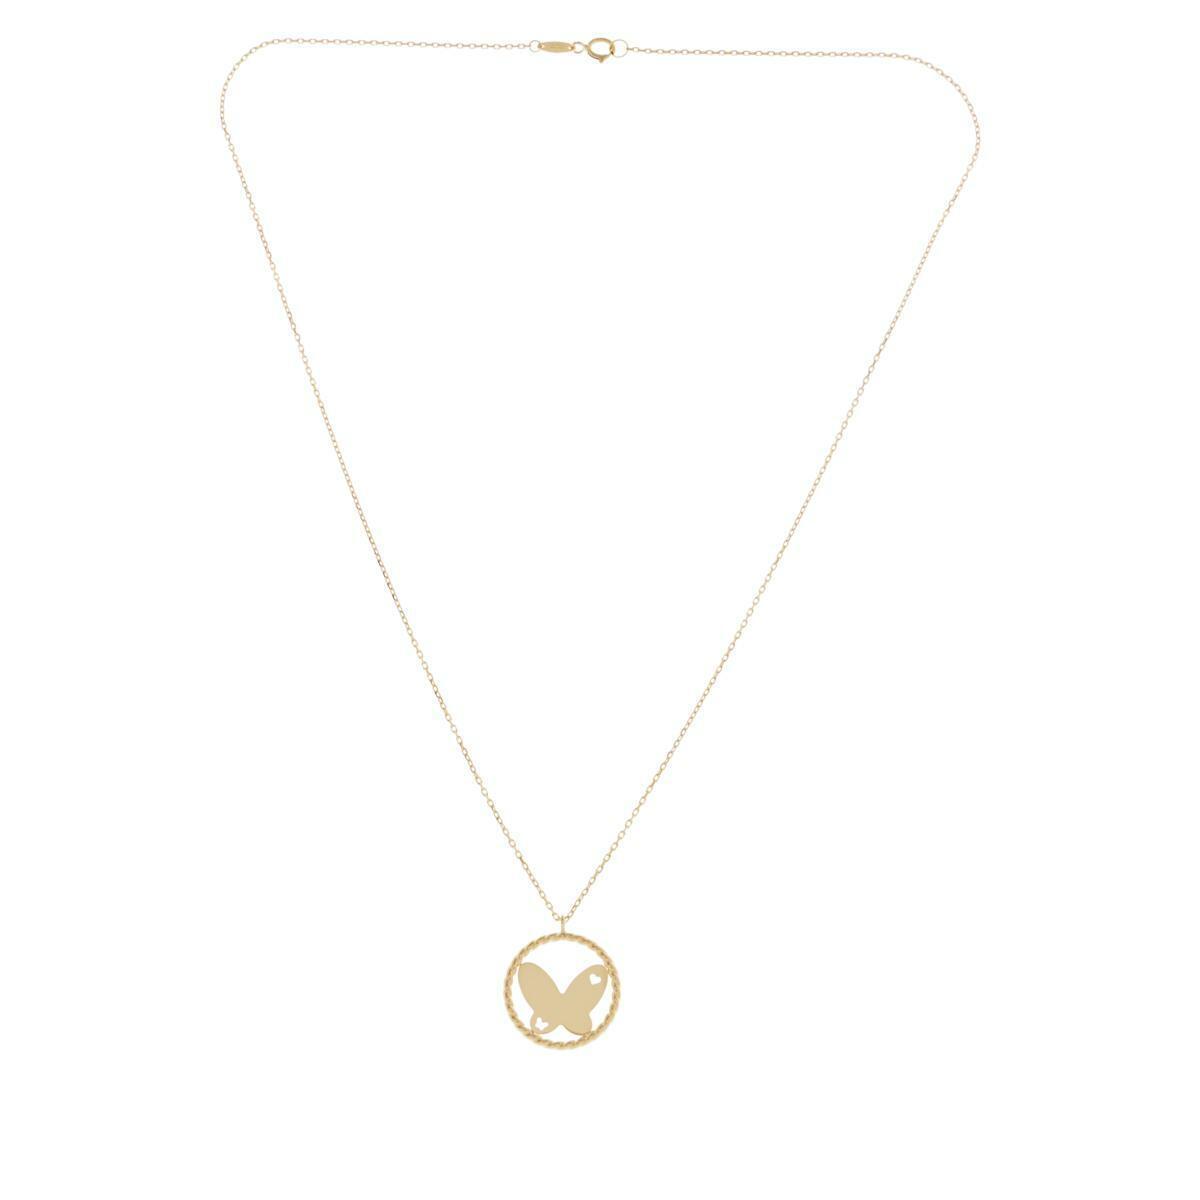 Gold Expressions 10K Gold Butterfly Cable Chain Necklace - HSN $220